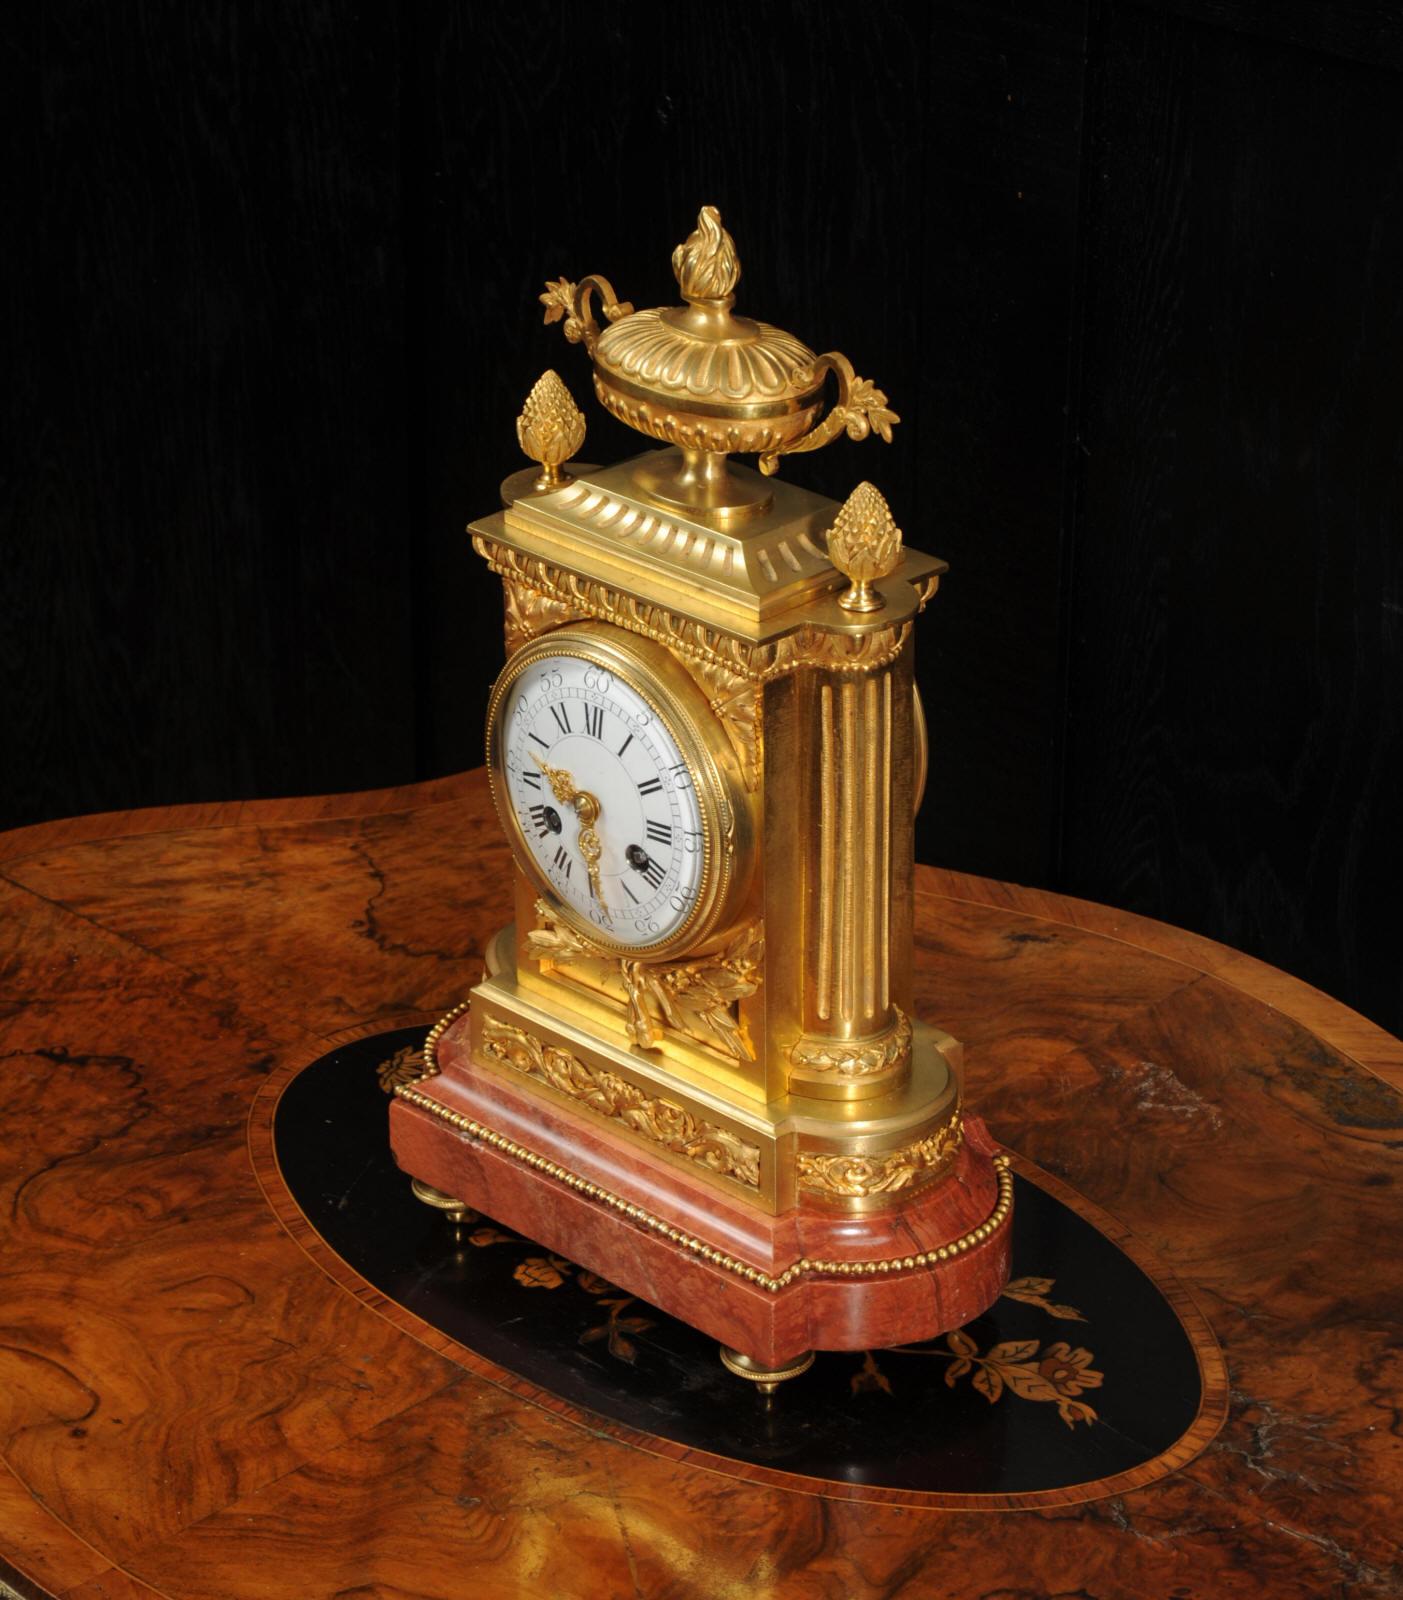 Ormolu and Marble Louis XVI Antique French Clock by Charpentier & Cie, Paris 1